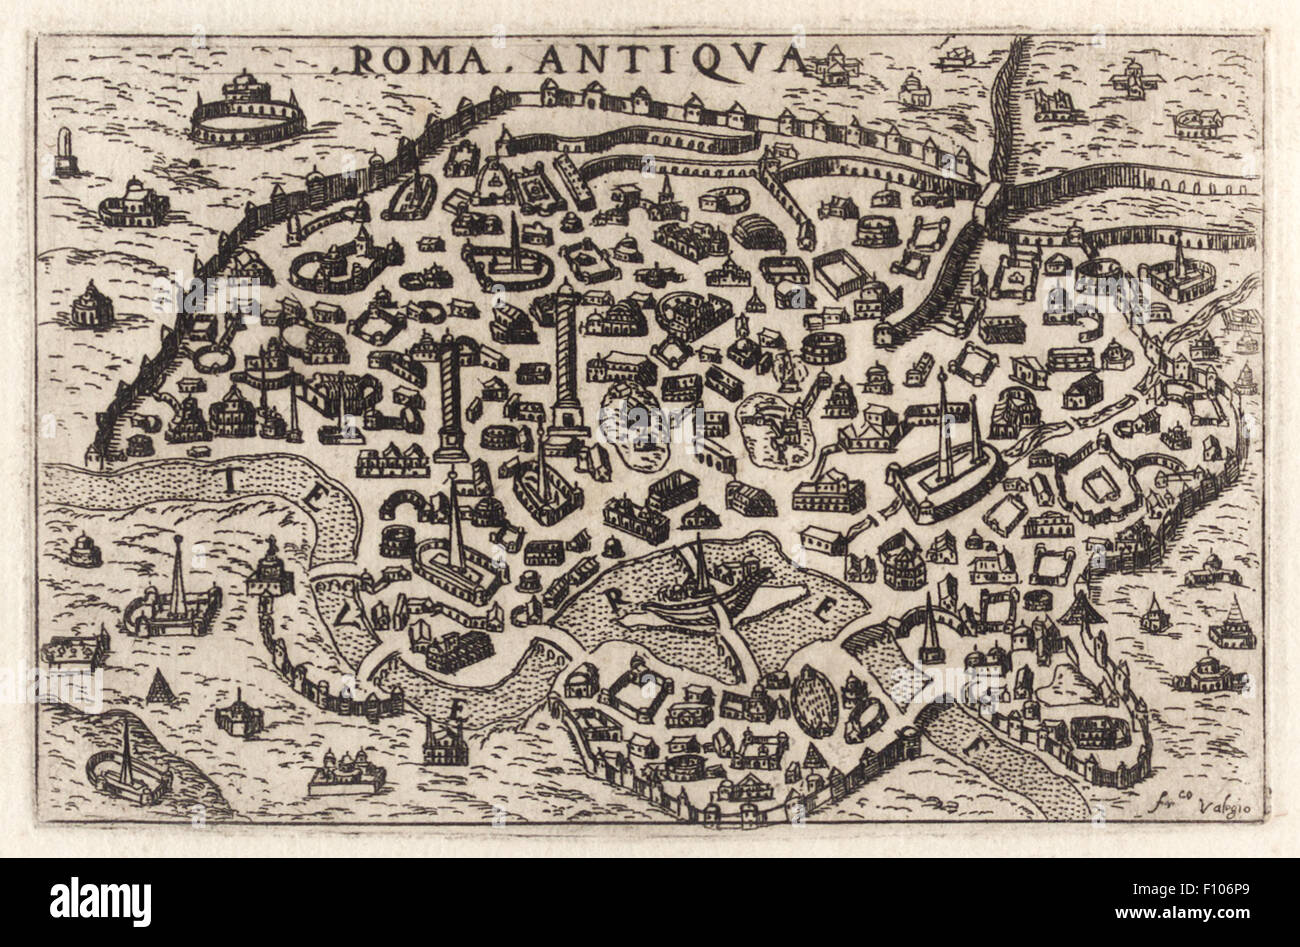 'Roma Antiqva' View of Rome circa 1580 engraved and signed by Francesco Valesio (ca 1560-1640). See description for more information. Stock Photo